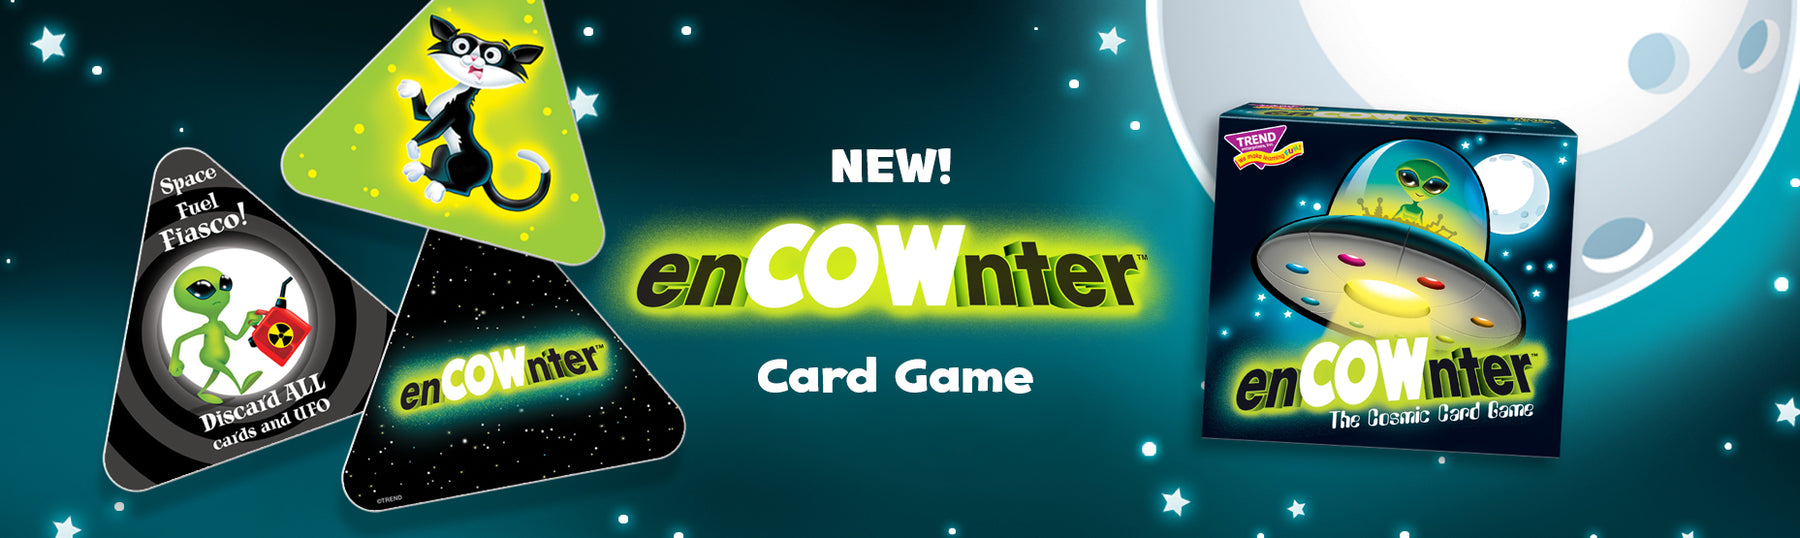 Fun new family game enCOWnter by TREND